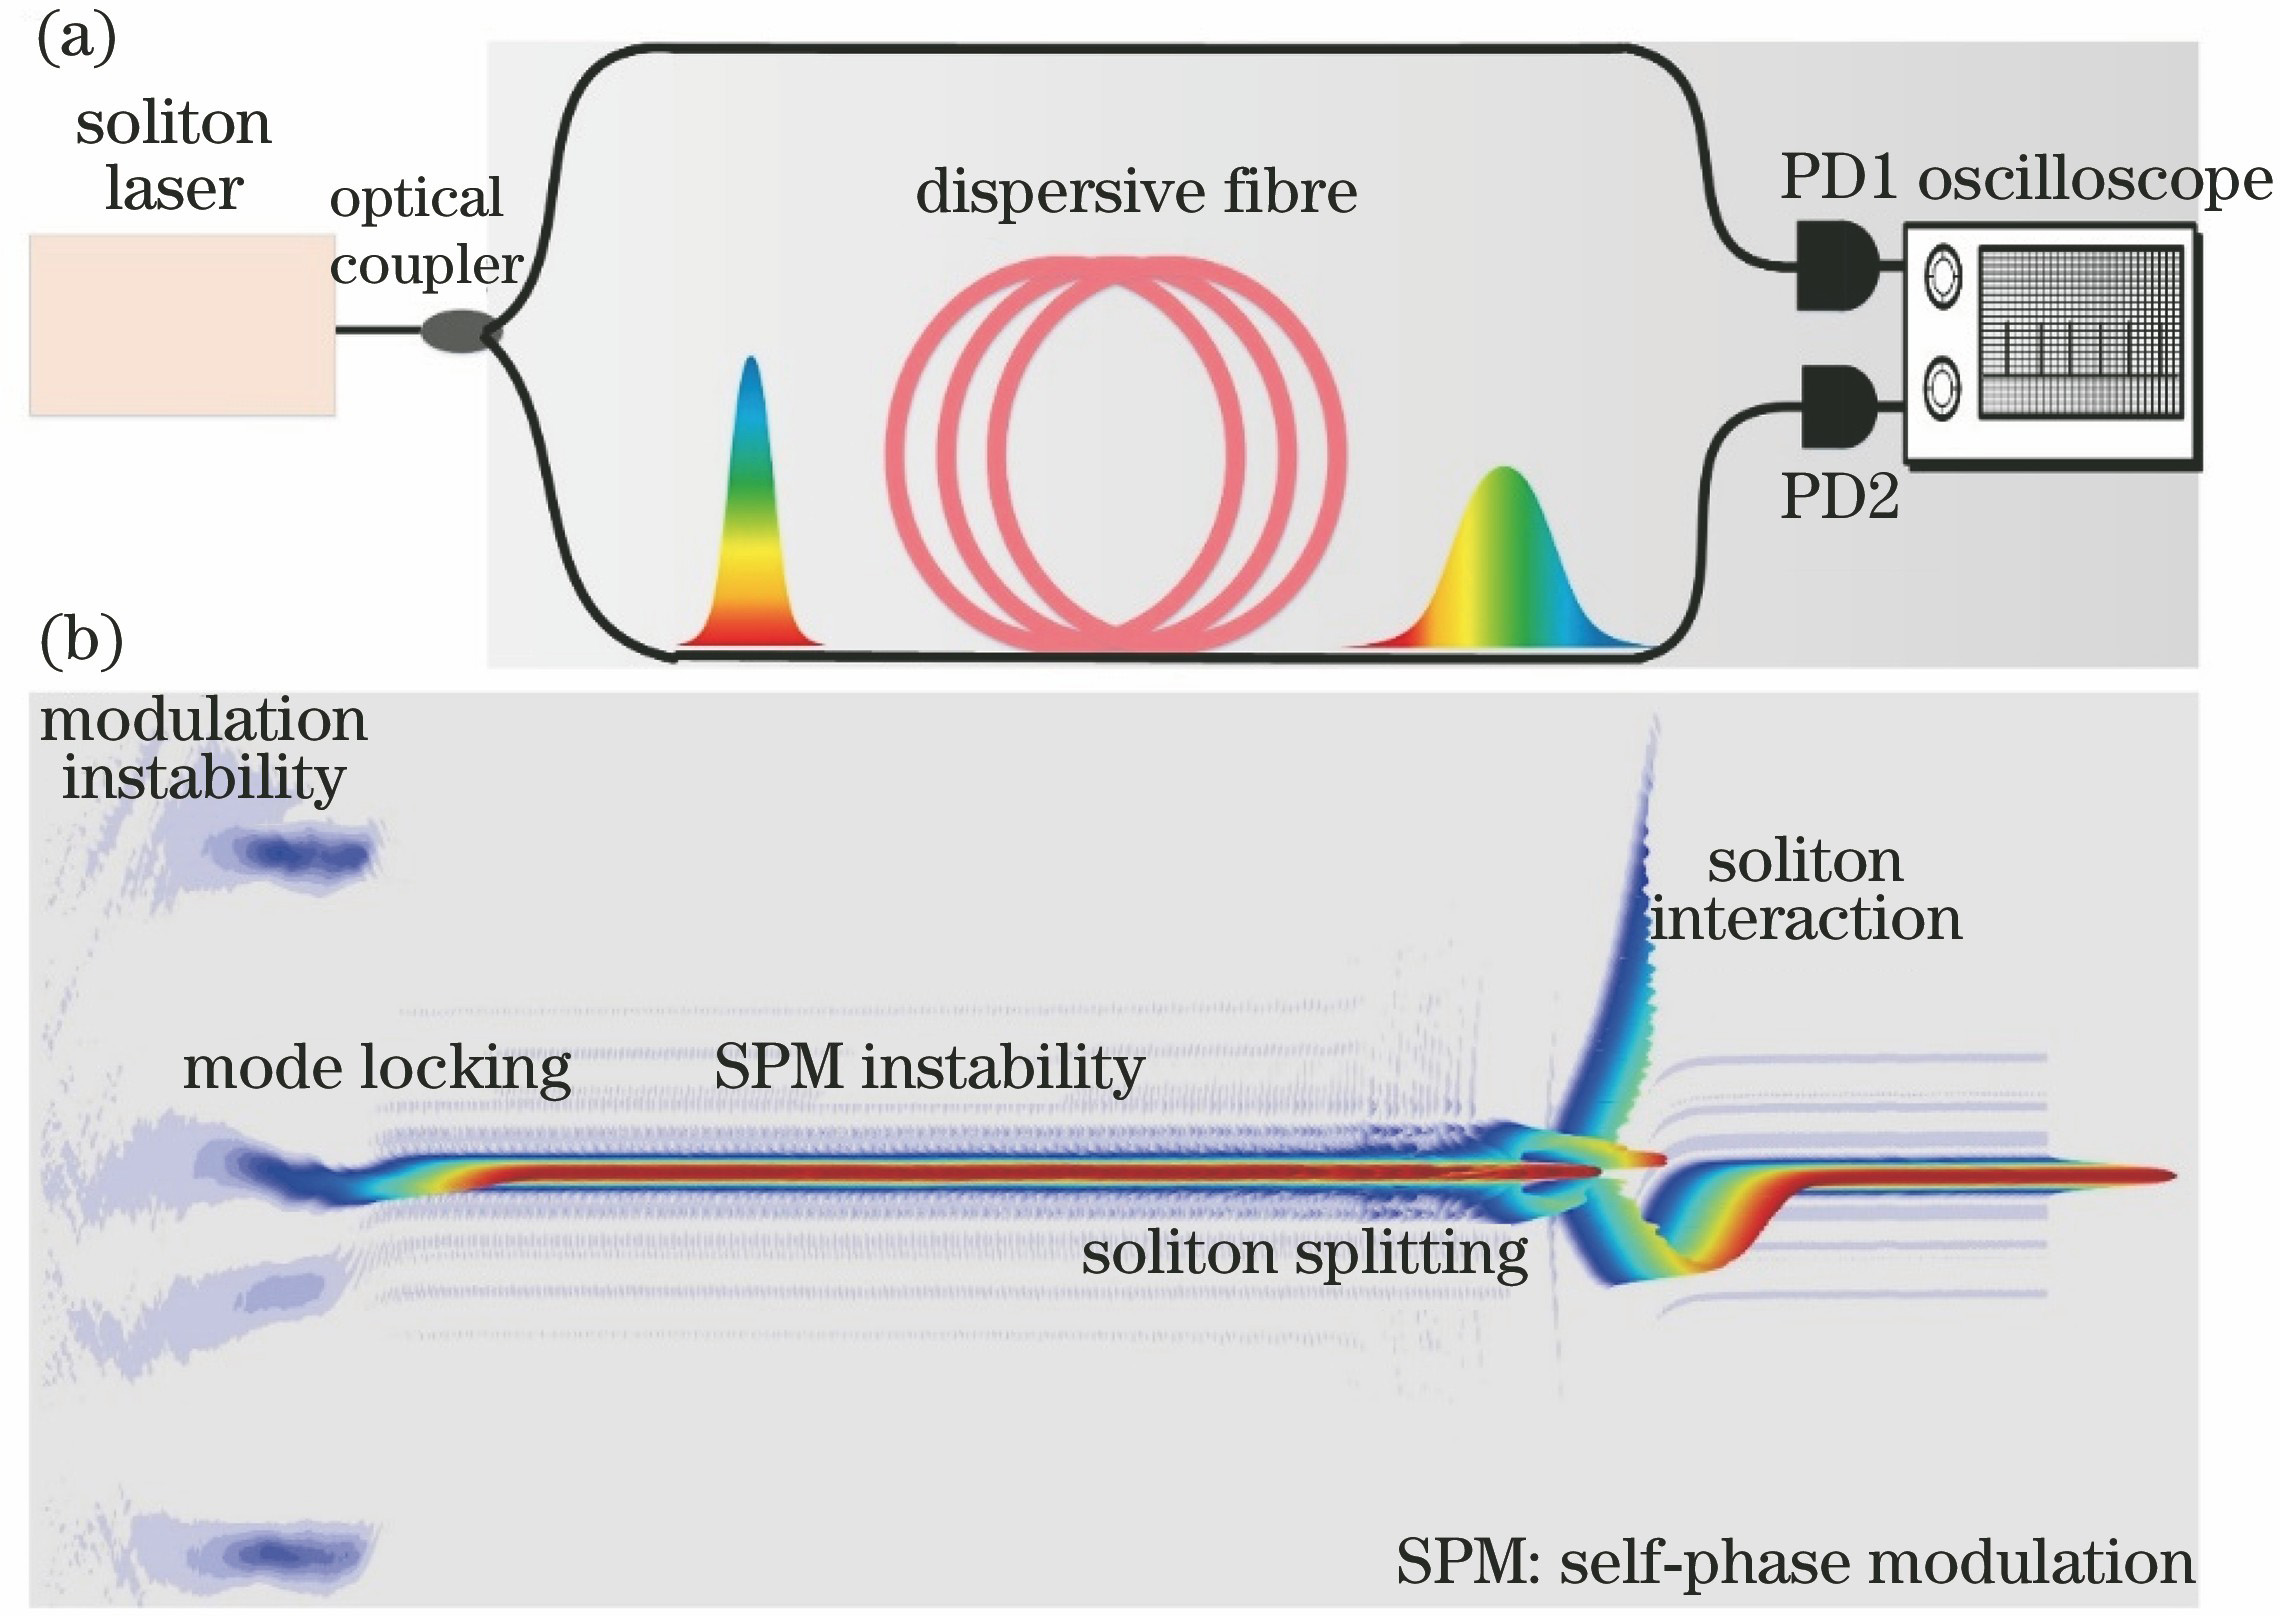 Build-up of dissipative solitons in laser. (a) Real-time measurement system; (b) different stages during build-up of dissipative soliton